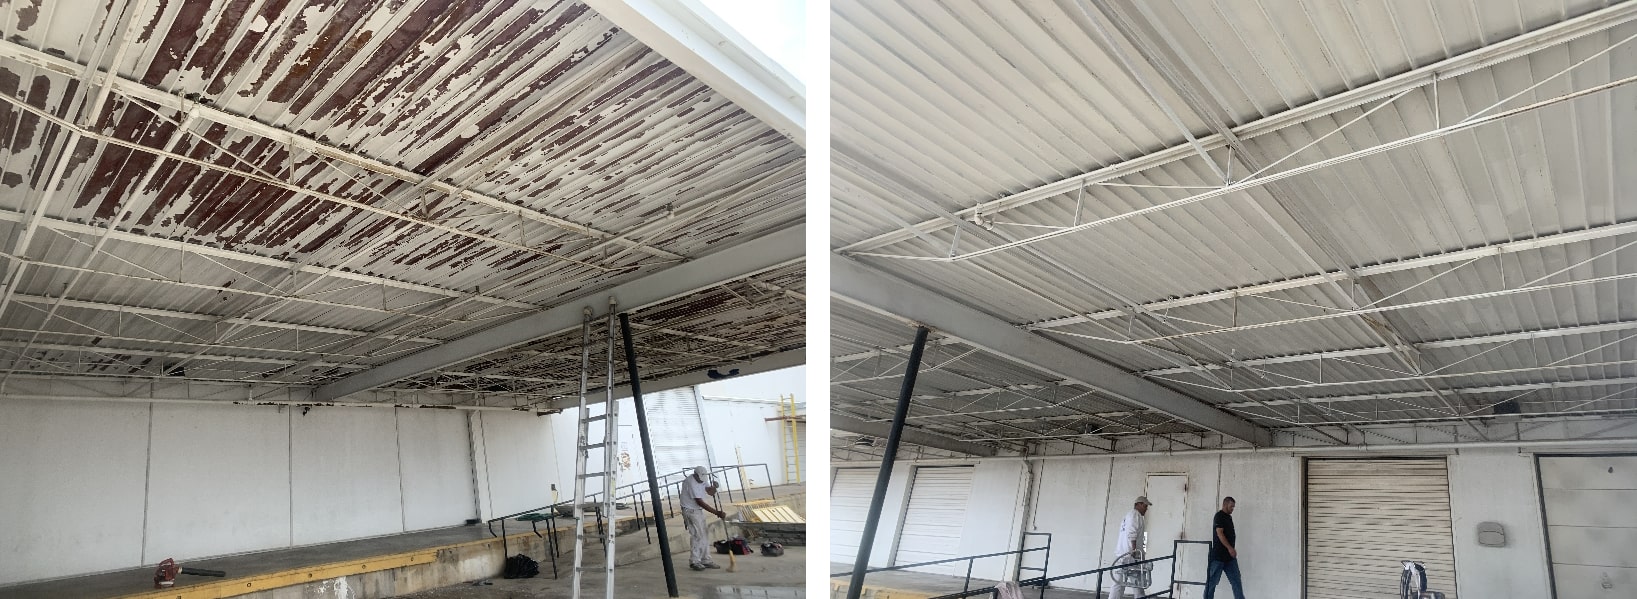 commercial awning painting before and after min